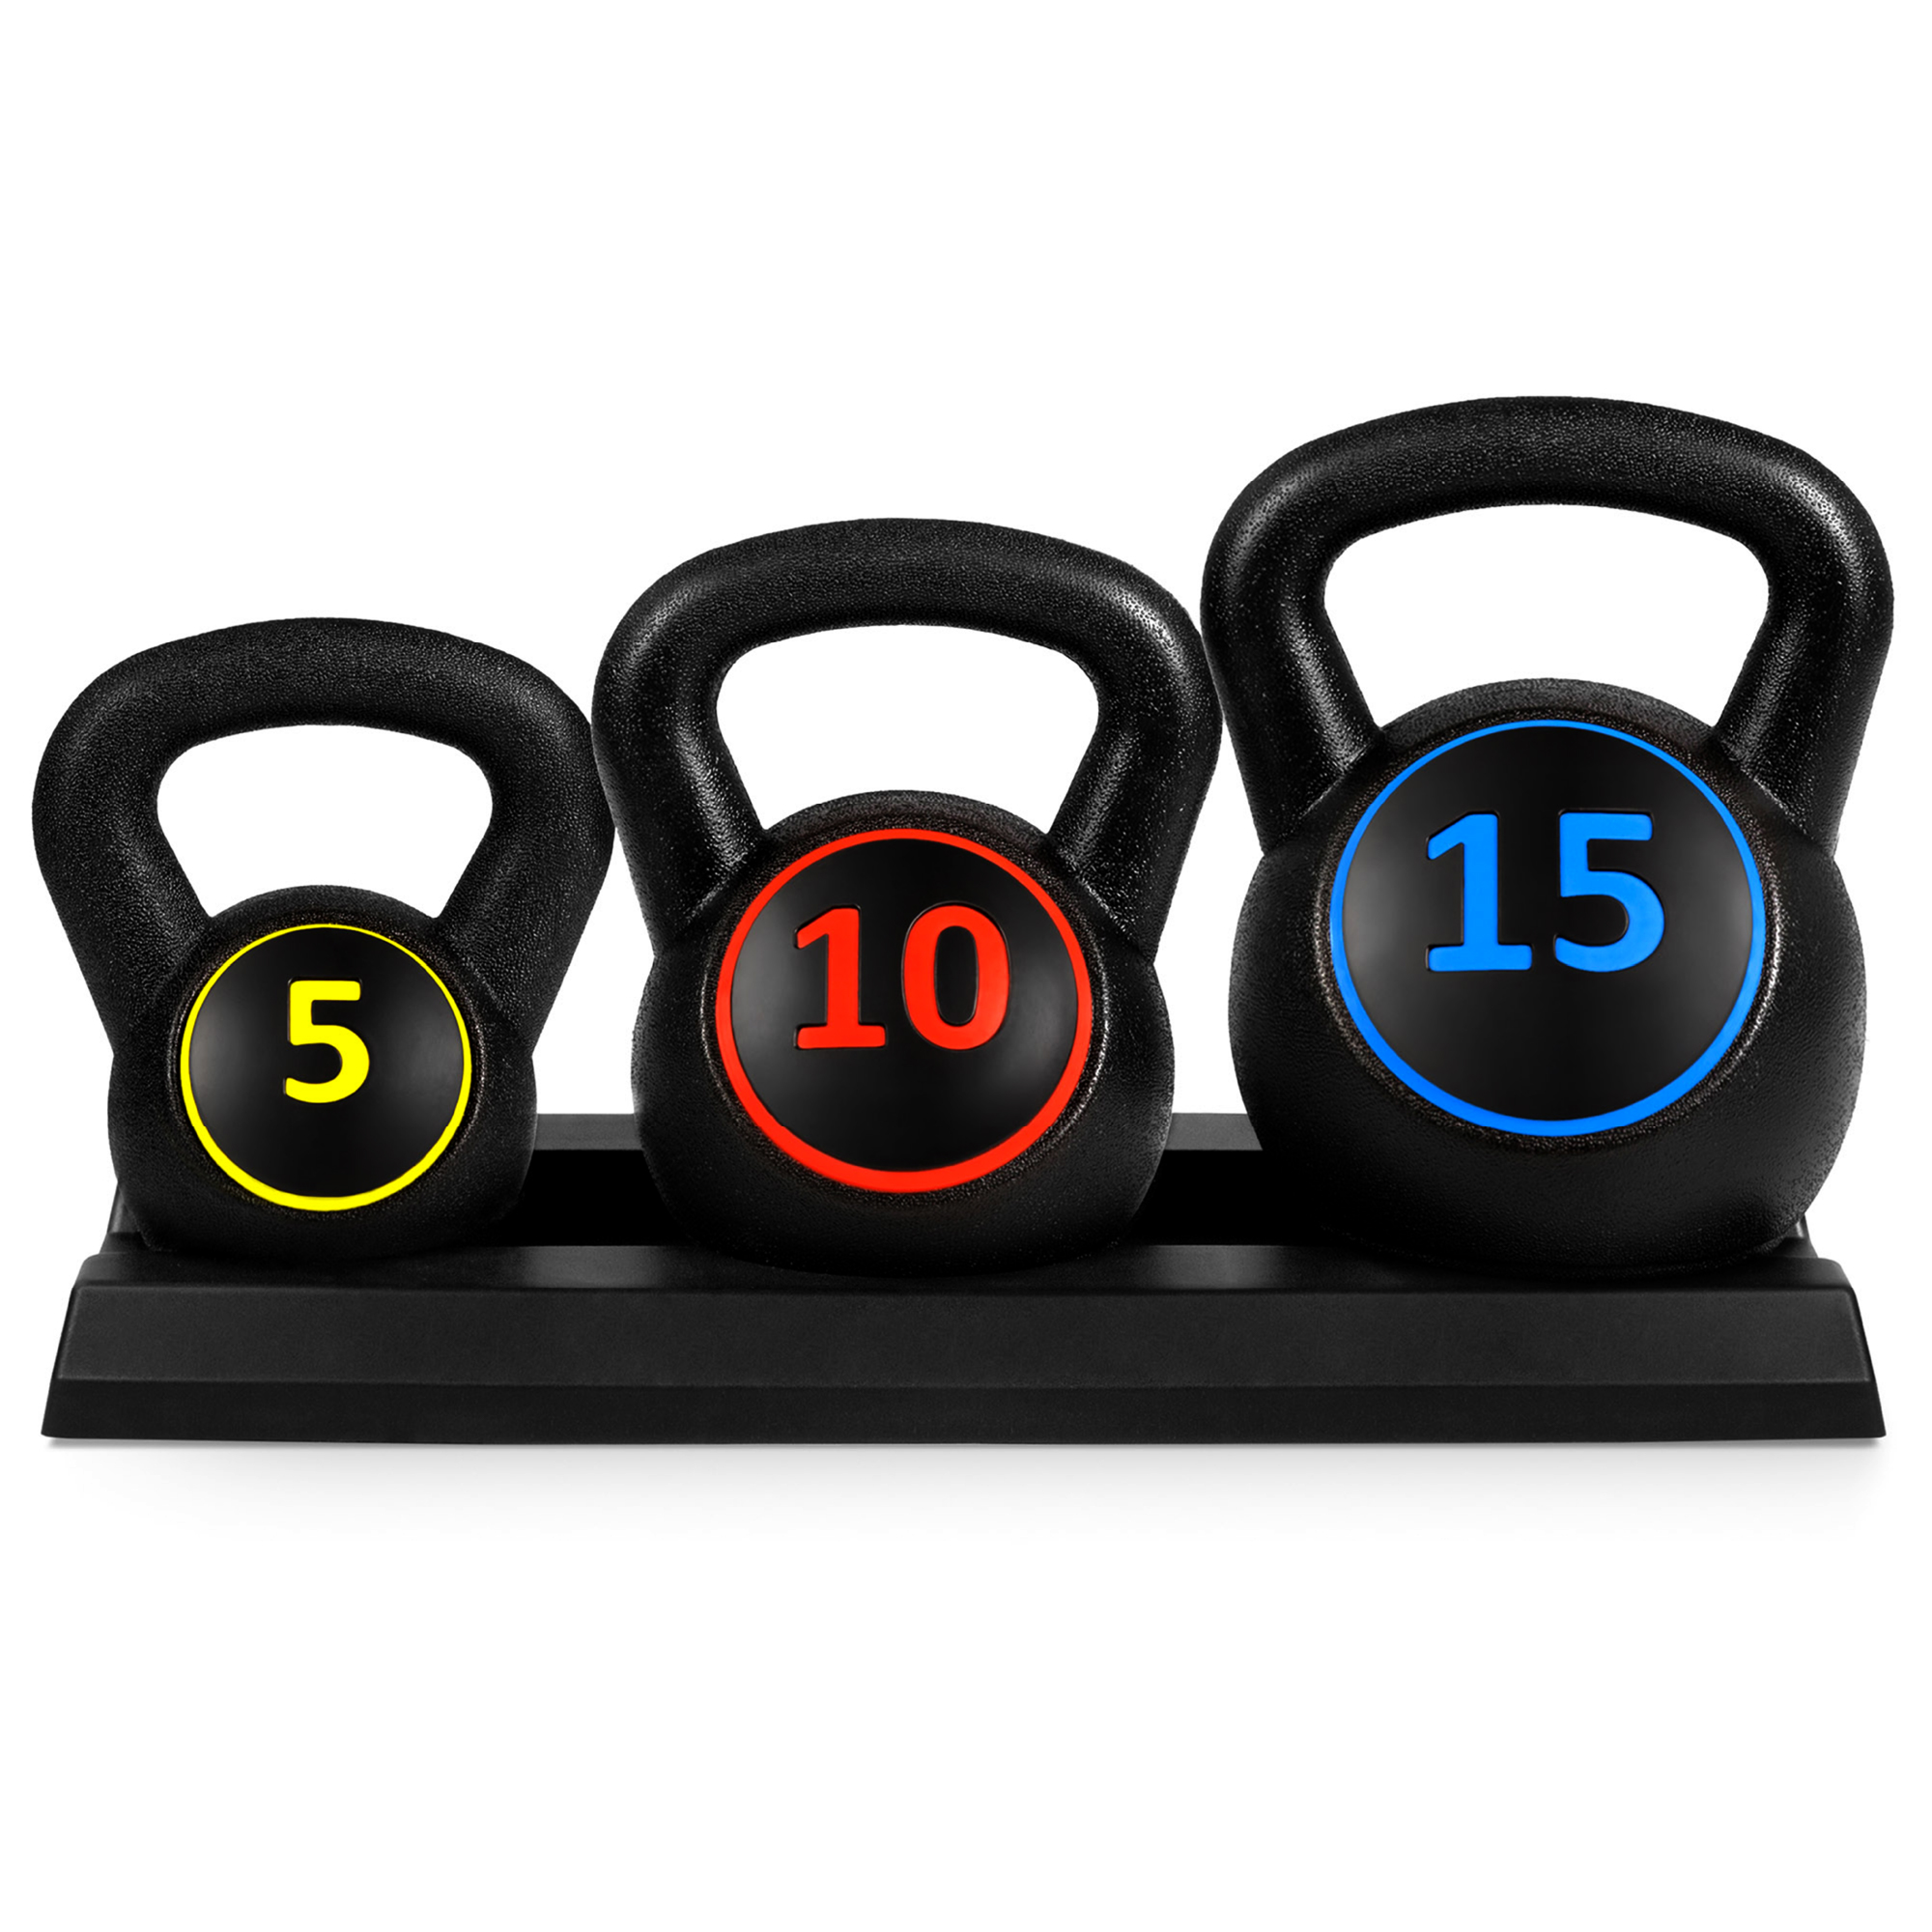 Best Choice Products 3-Piece Kettlebell Set with Storage Rack, Exercise Fitness  Concrete Weights 5lb, 10lb, 15lb - image 1 of 7